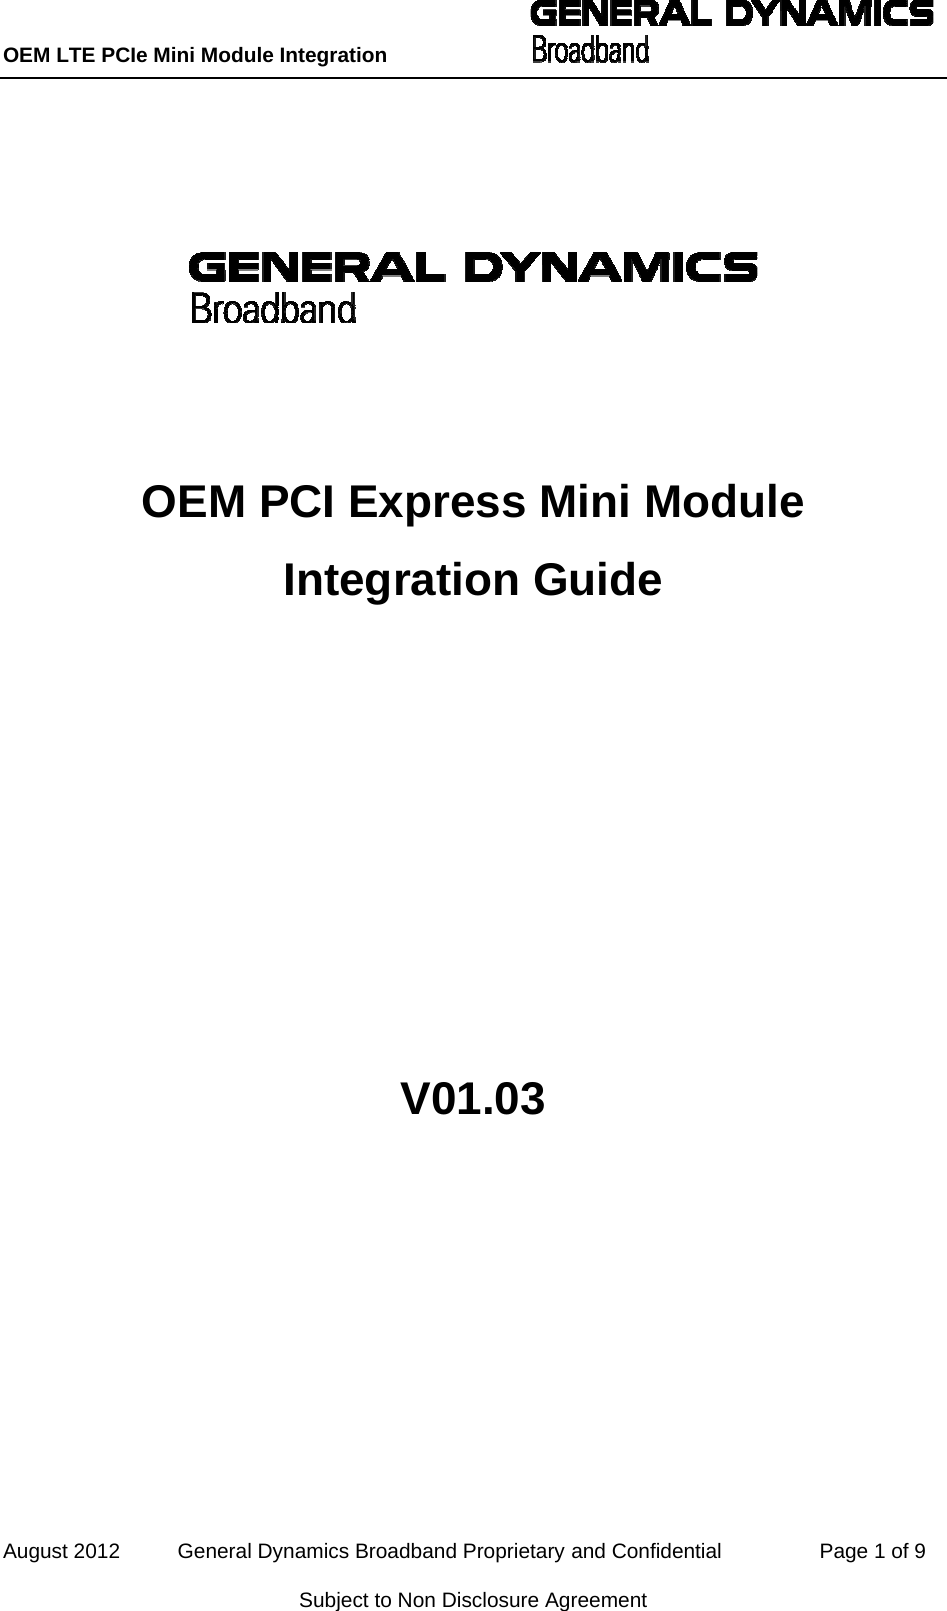 OEM LTE PCIe Mini Module Integration           August 2012          General Dynamics Broadband Proprietary and Confidential                 Page 1 of 9 Subject to Non Disclosure Agreement       OEM PCI Express Mini Module Integration Guide       V01.03    